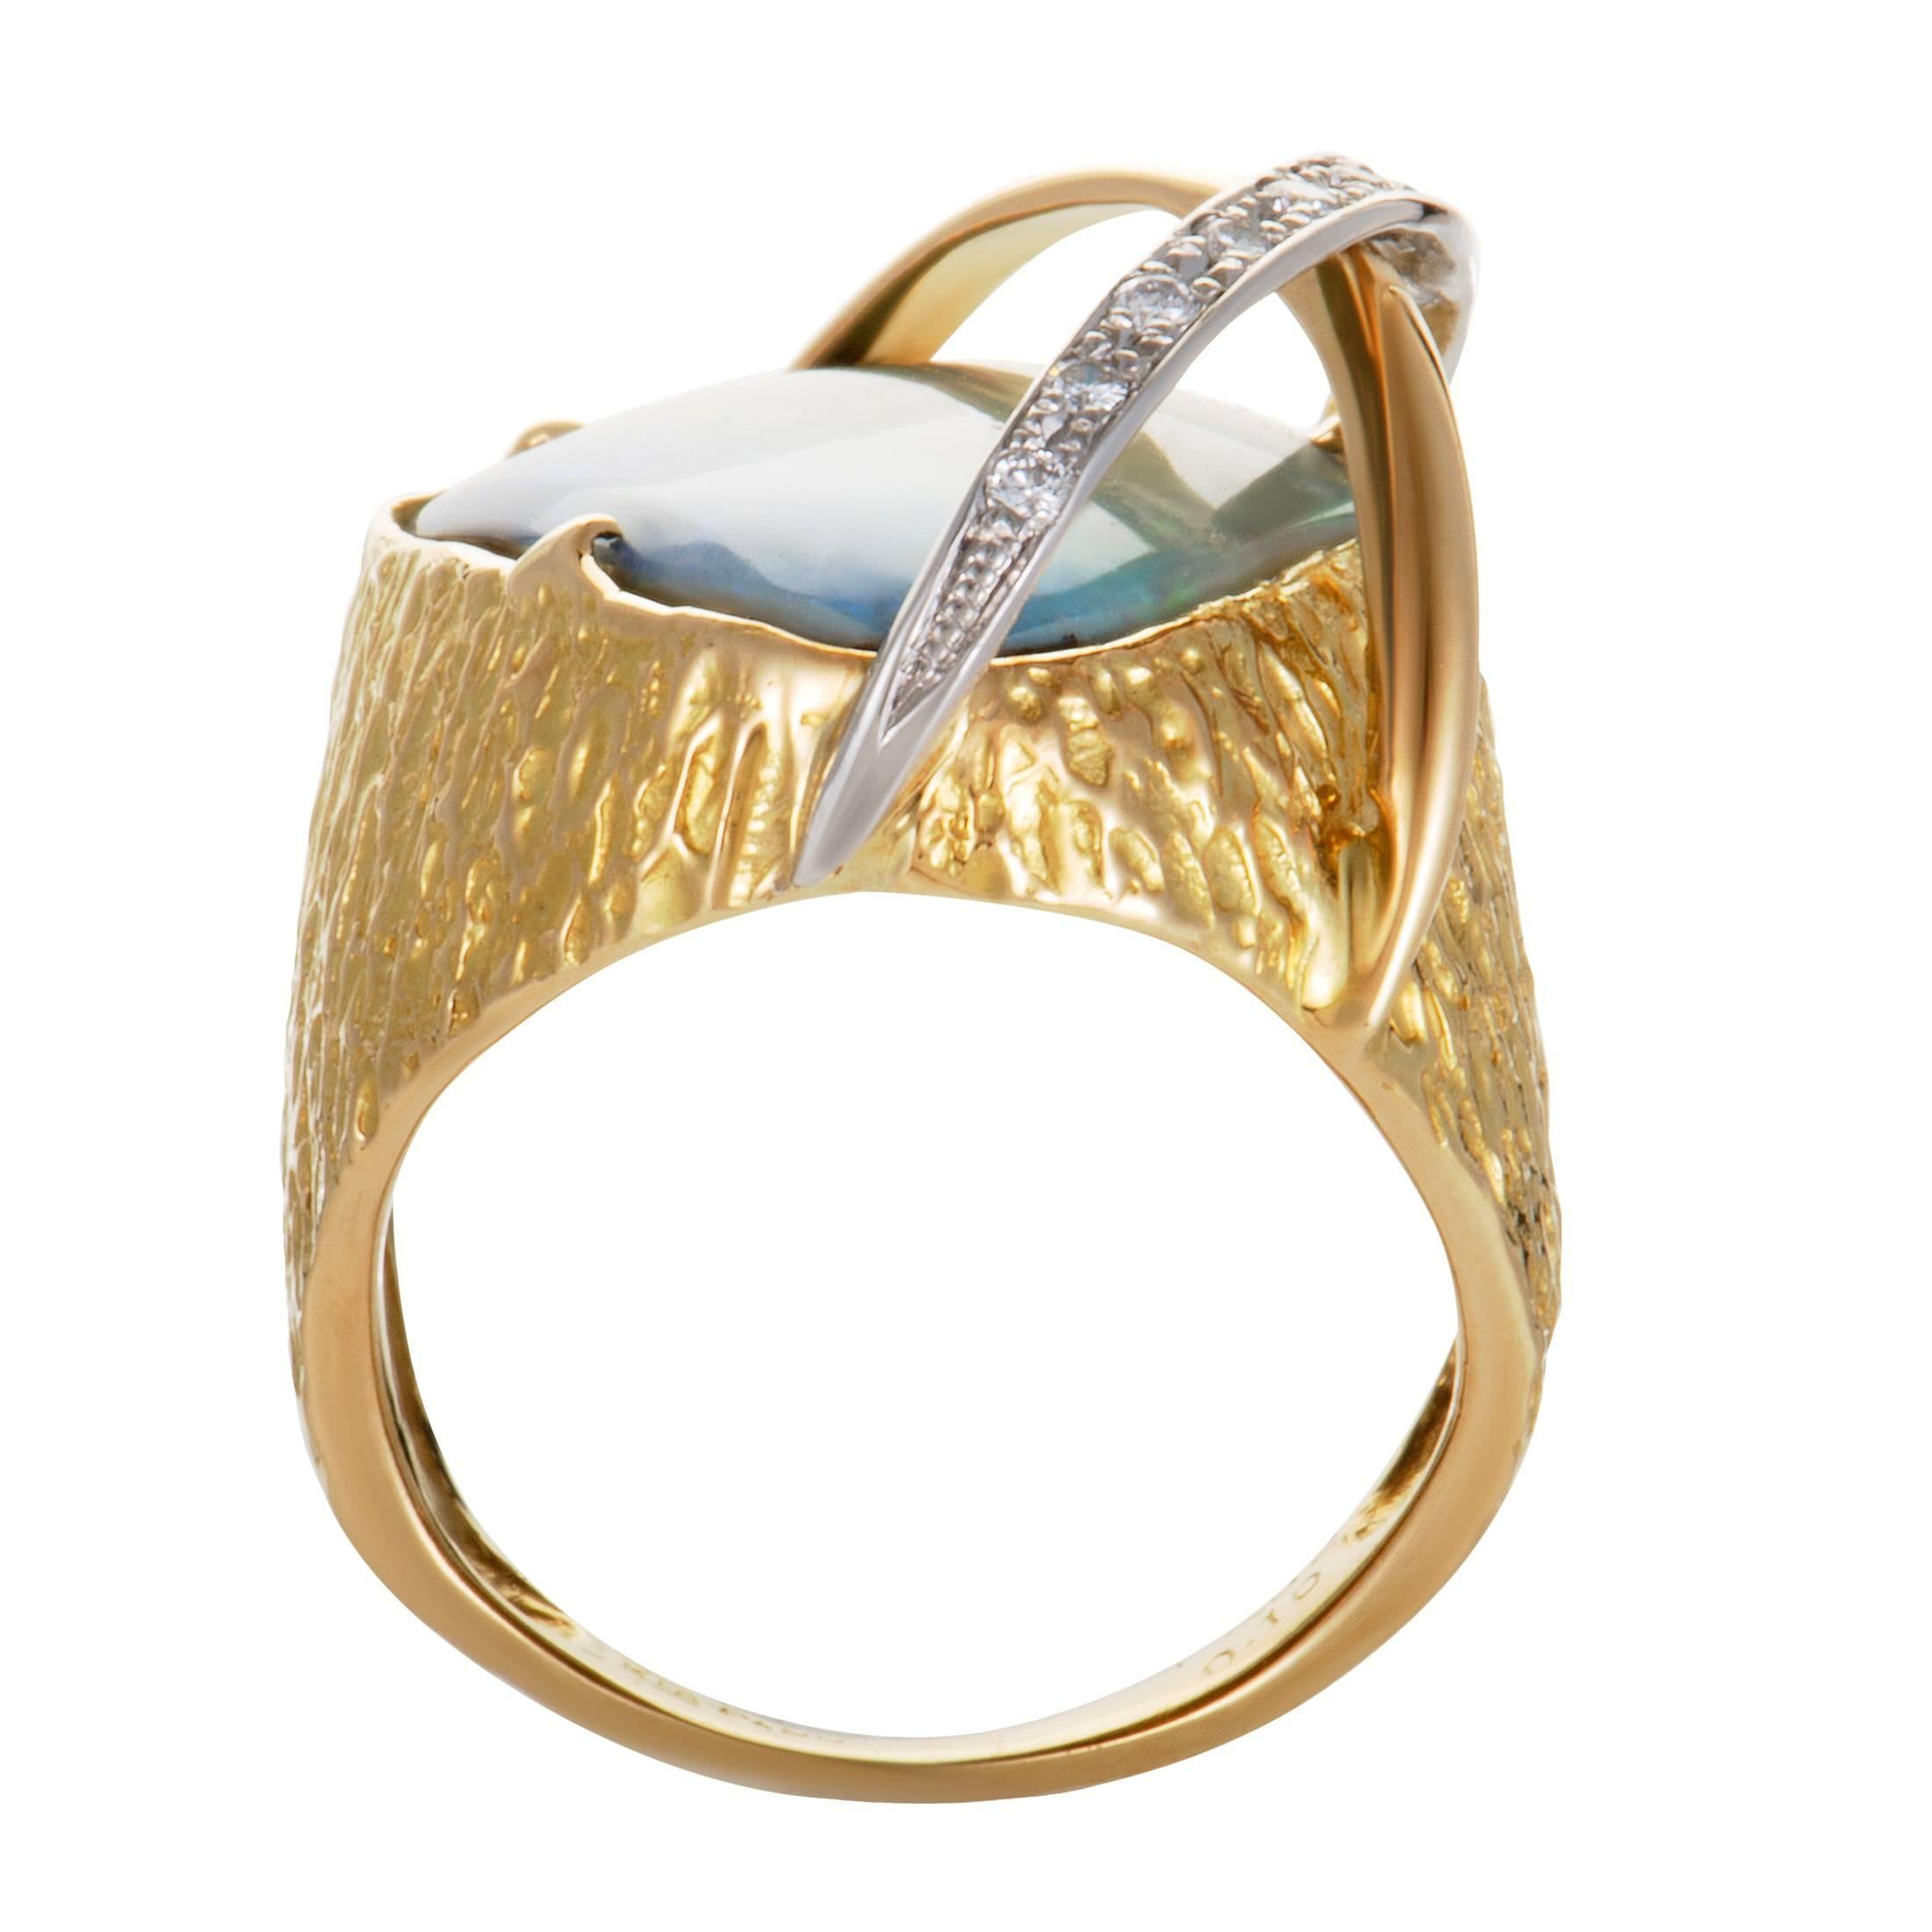 The imaginative combination of shapes, stones and metals creates an intriguing visual effect in this ring, offering a look of exceptional allure. The ring is made of 18K yellow gold and platinum and boasts a total of 0.10 carats of sparkly diamonds,